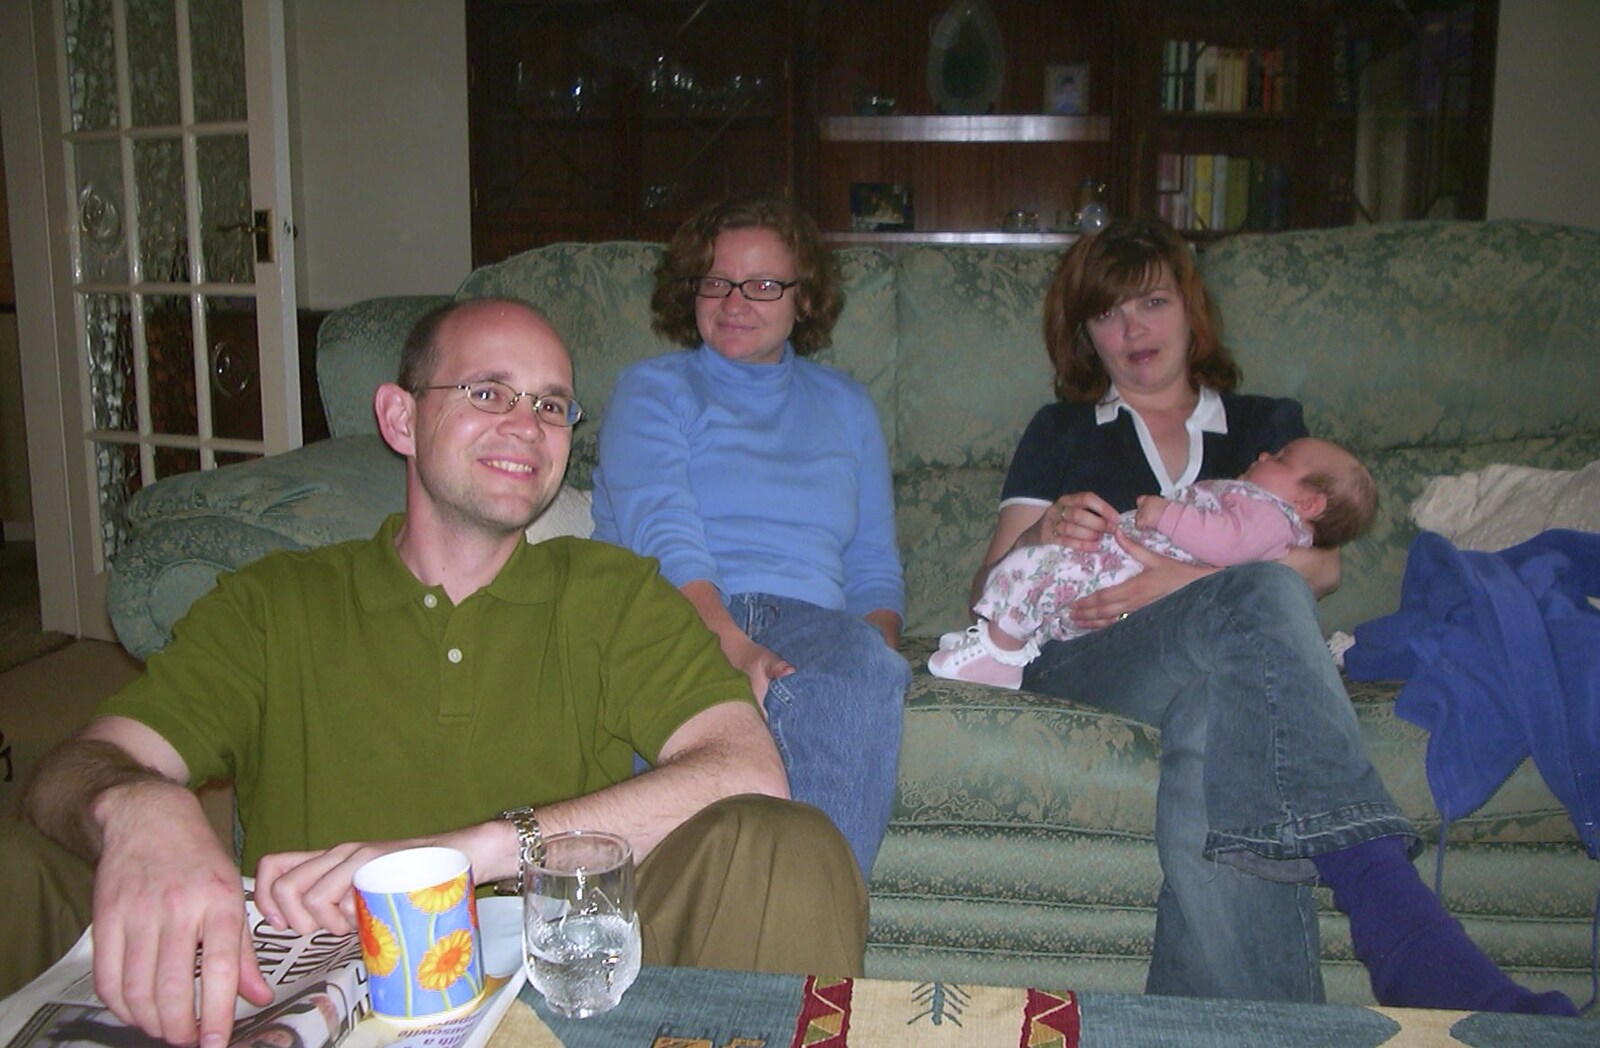 Phil, Lolly, Michelle and the baby from Sean's New Sprog, New Milton and Hordle, Hampshire - 12th September 2001